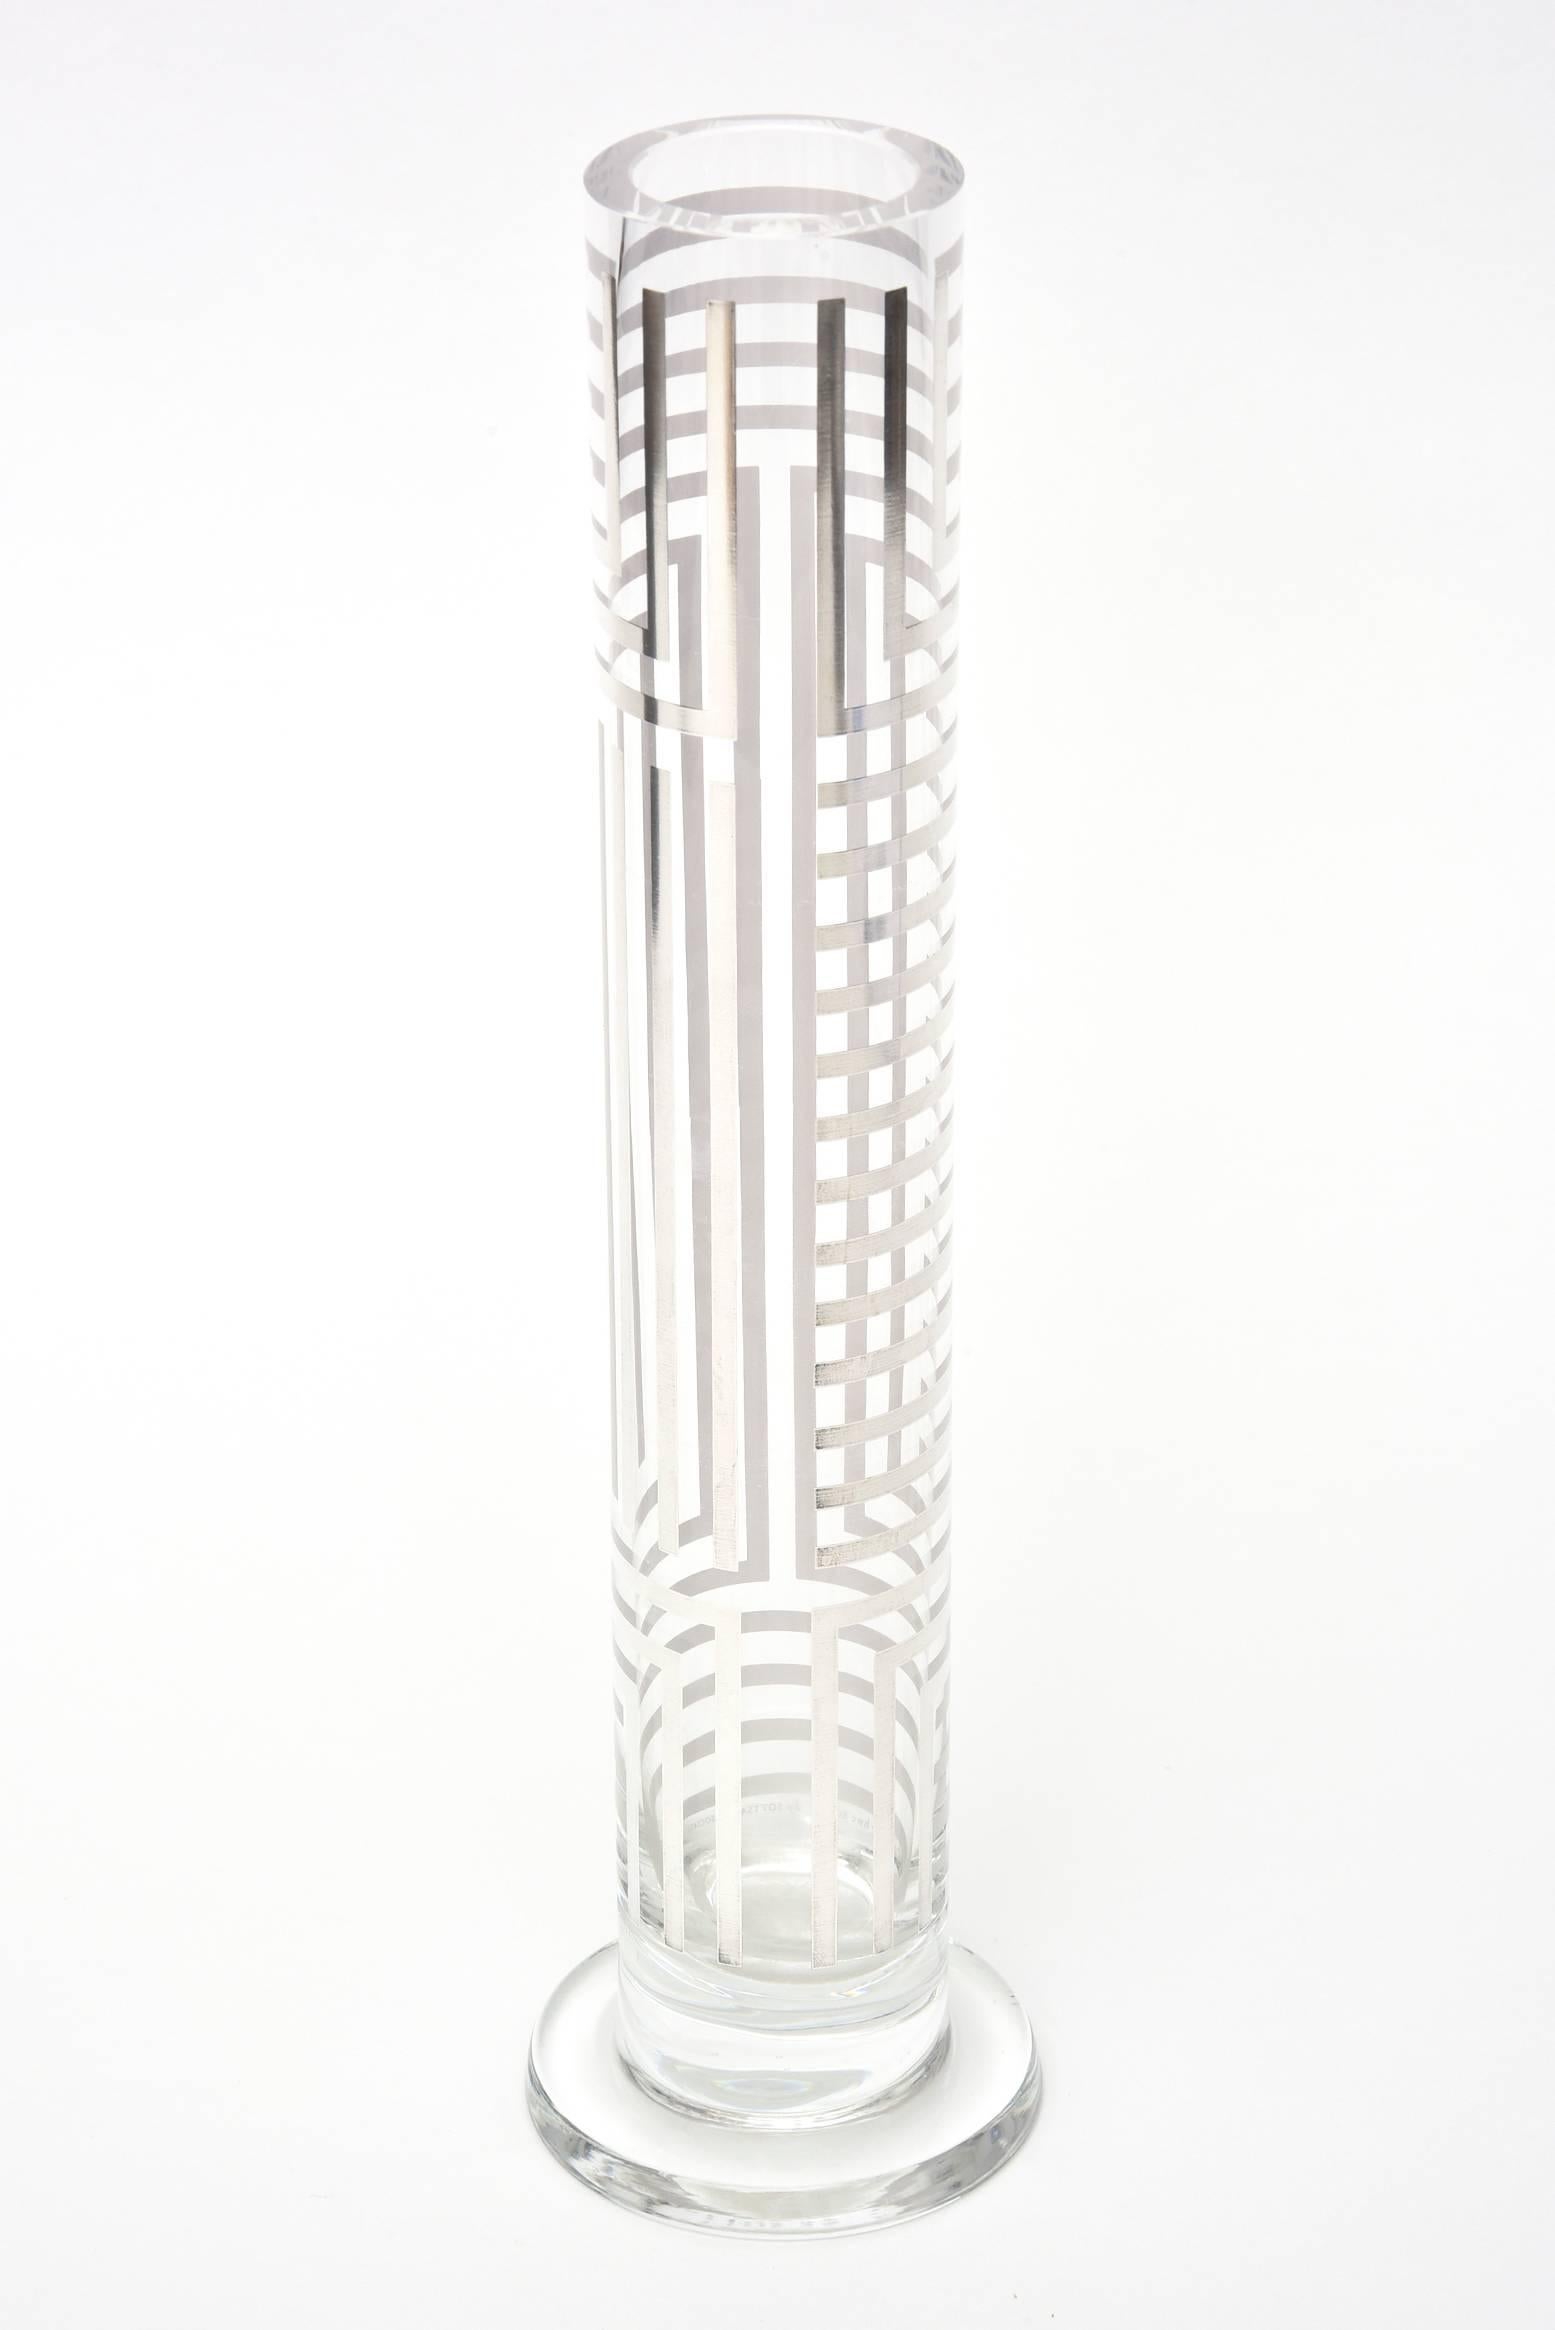 This wonderful stunning and tall architectural glass cylindrical vase and or bud vase is signed on the bottom Argento Flavia Alves de Souza for HWE Egizia by Sottsass Associati. It is sterling silver overlay in Greek key geometric form. The opening